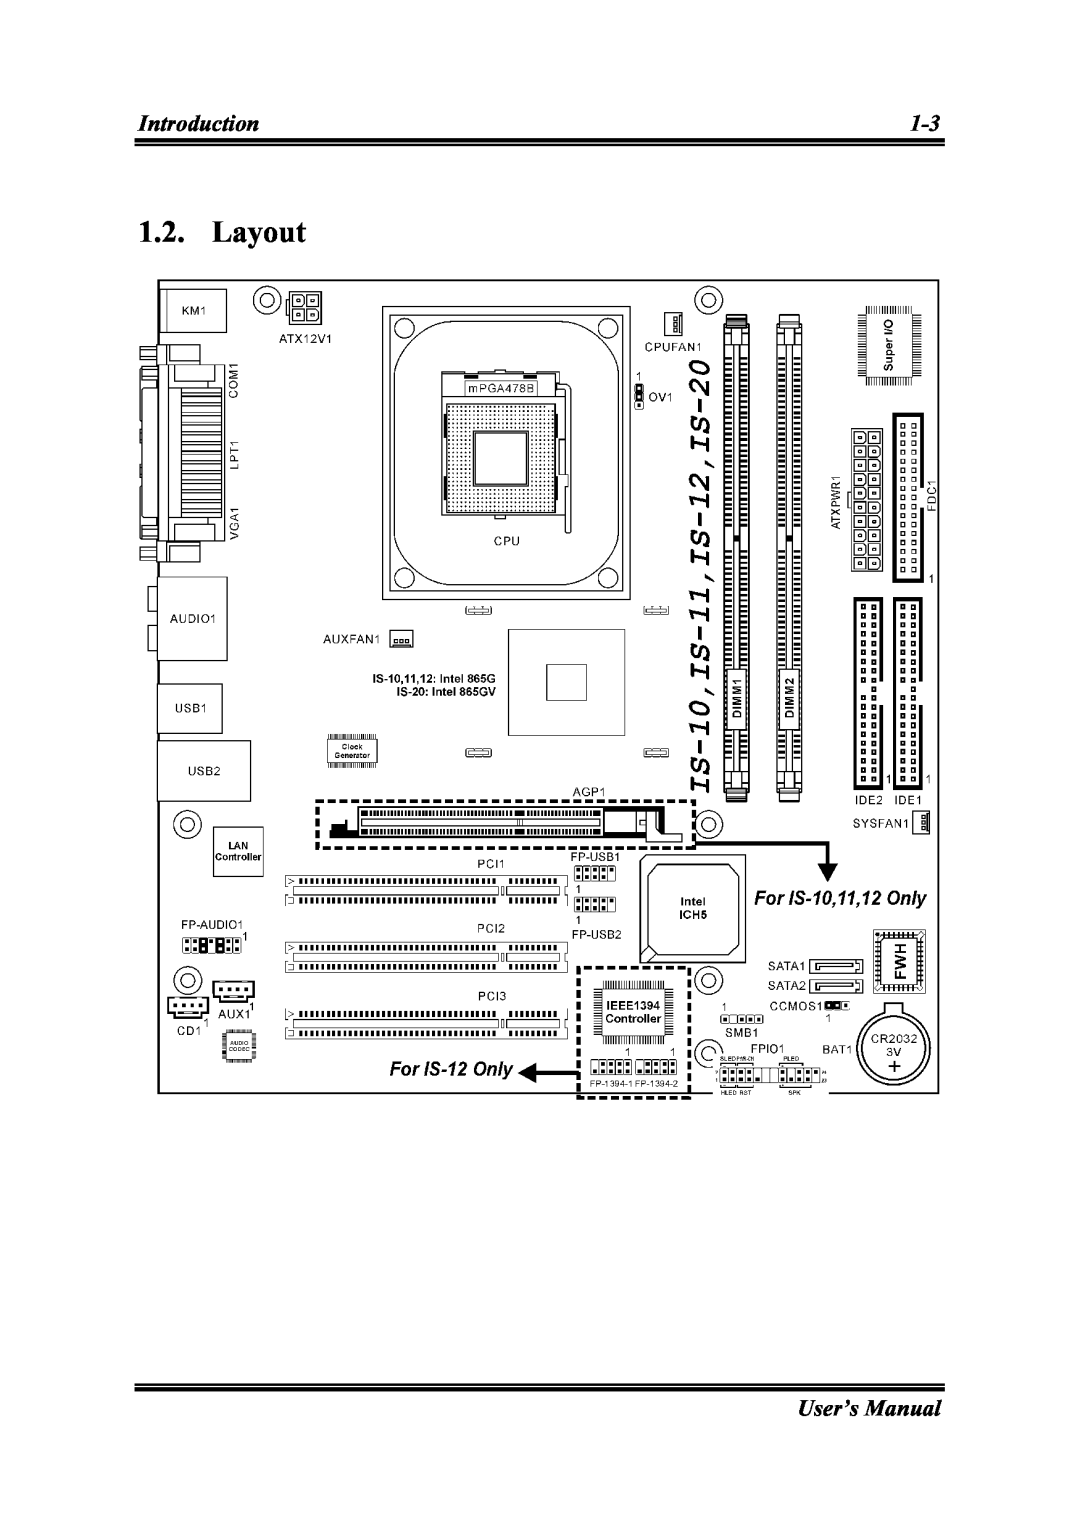 Abit IS-11, IS-12, IS-20, IS-10 user manual Layout, Introduction, User’s Manual 